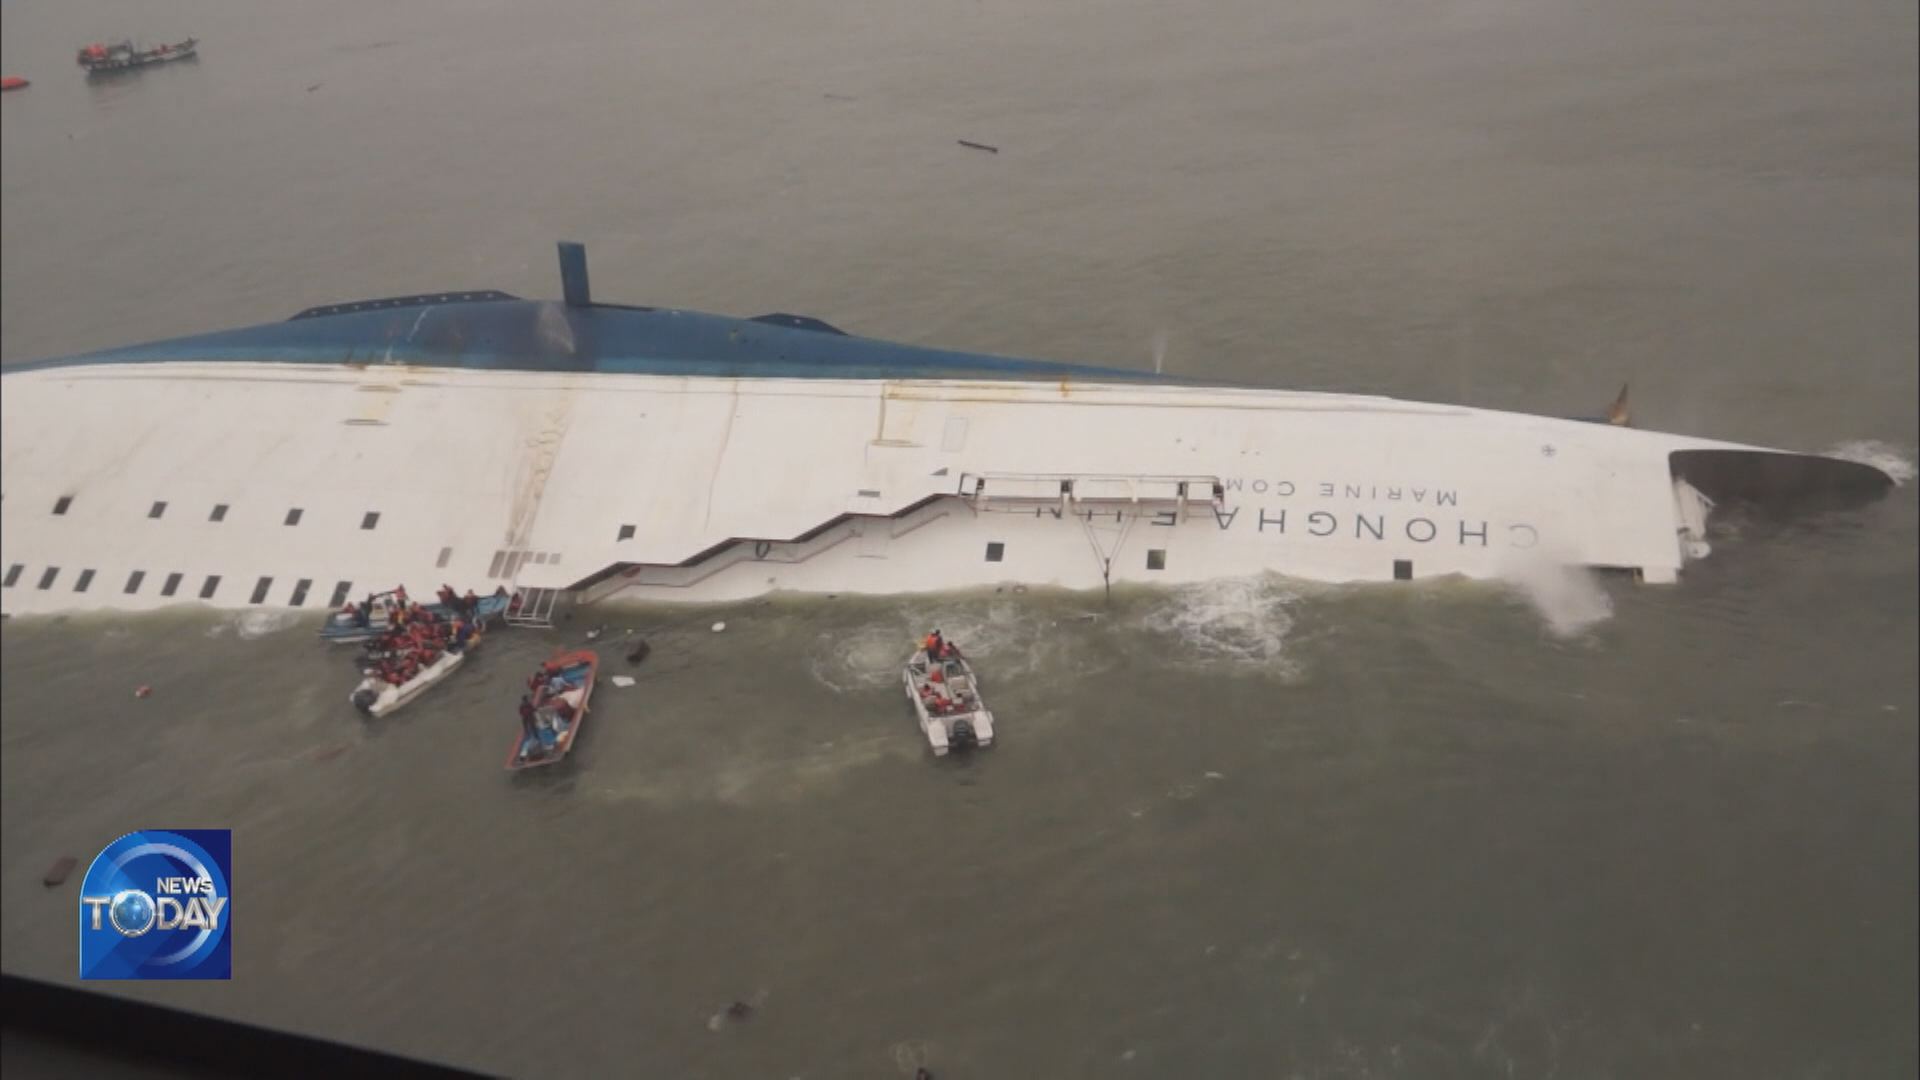 SEWOL FERRY DISASTER PROBE RESULTS